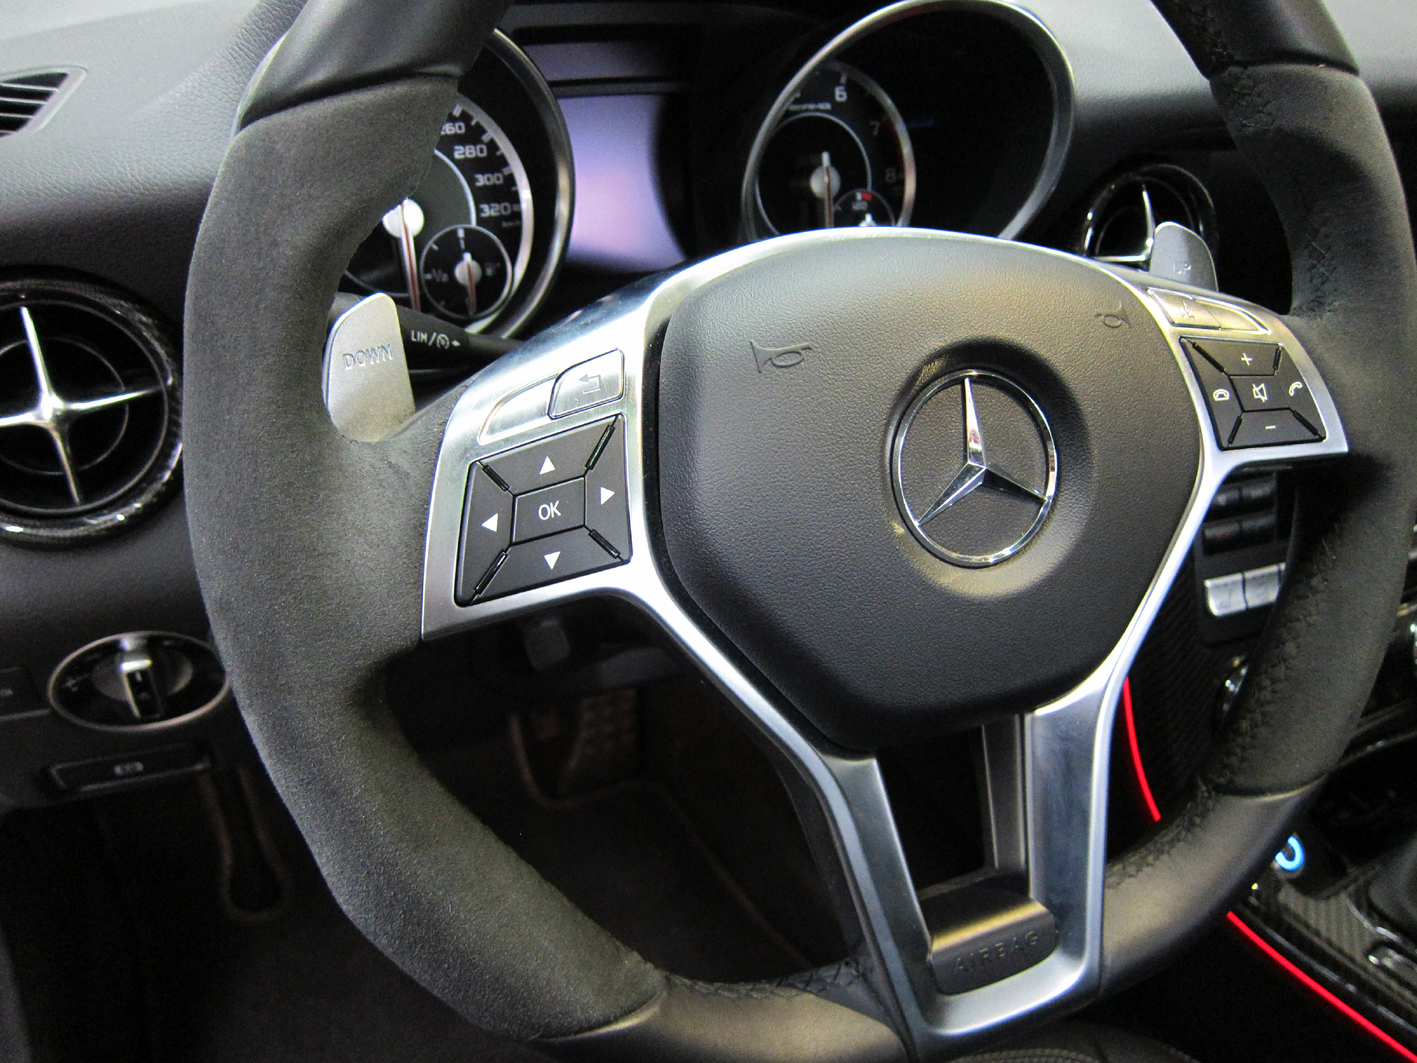 Mercedes SLK 172 Tuning with a AMG Steering Wheel from Chrometec